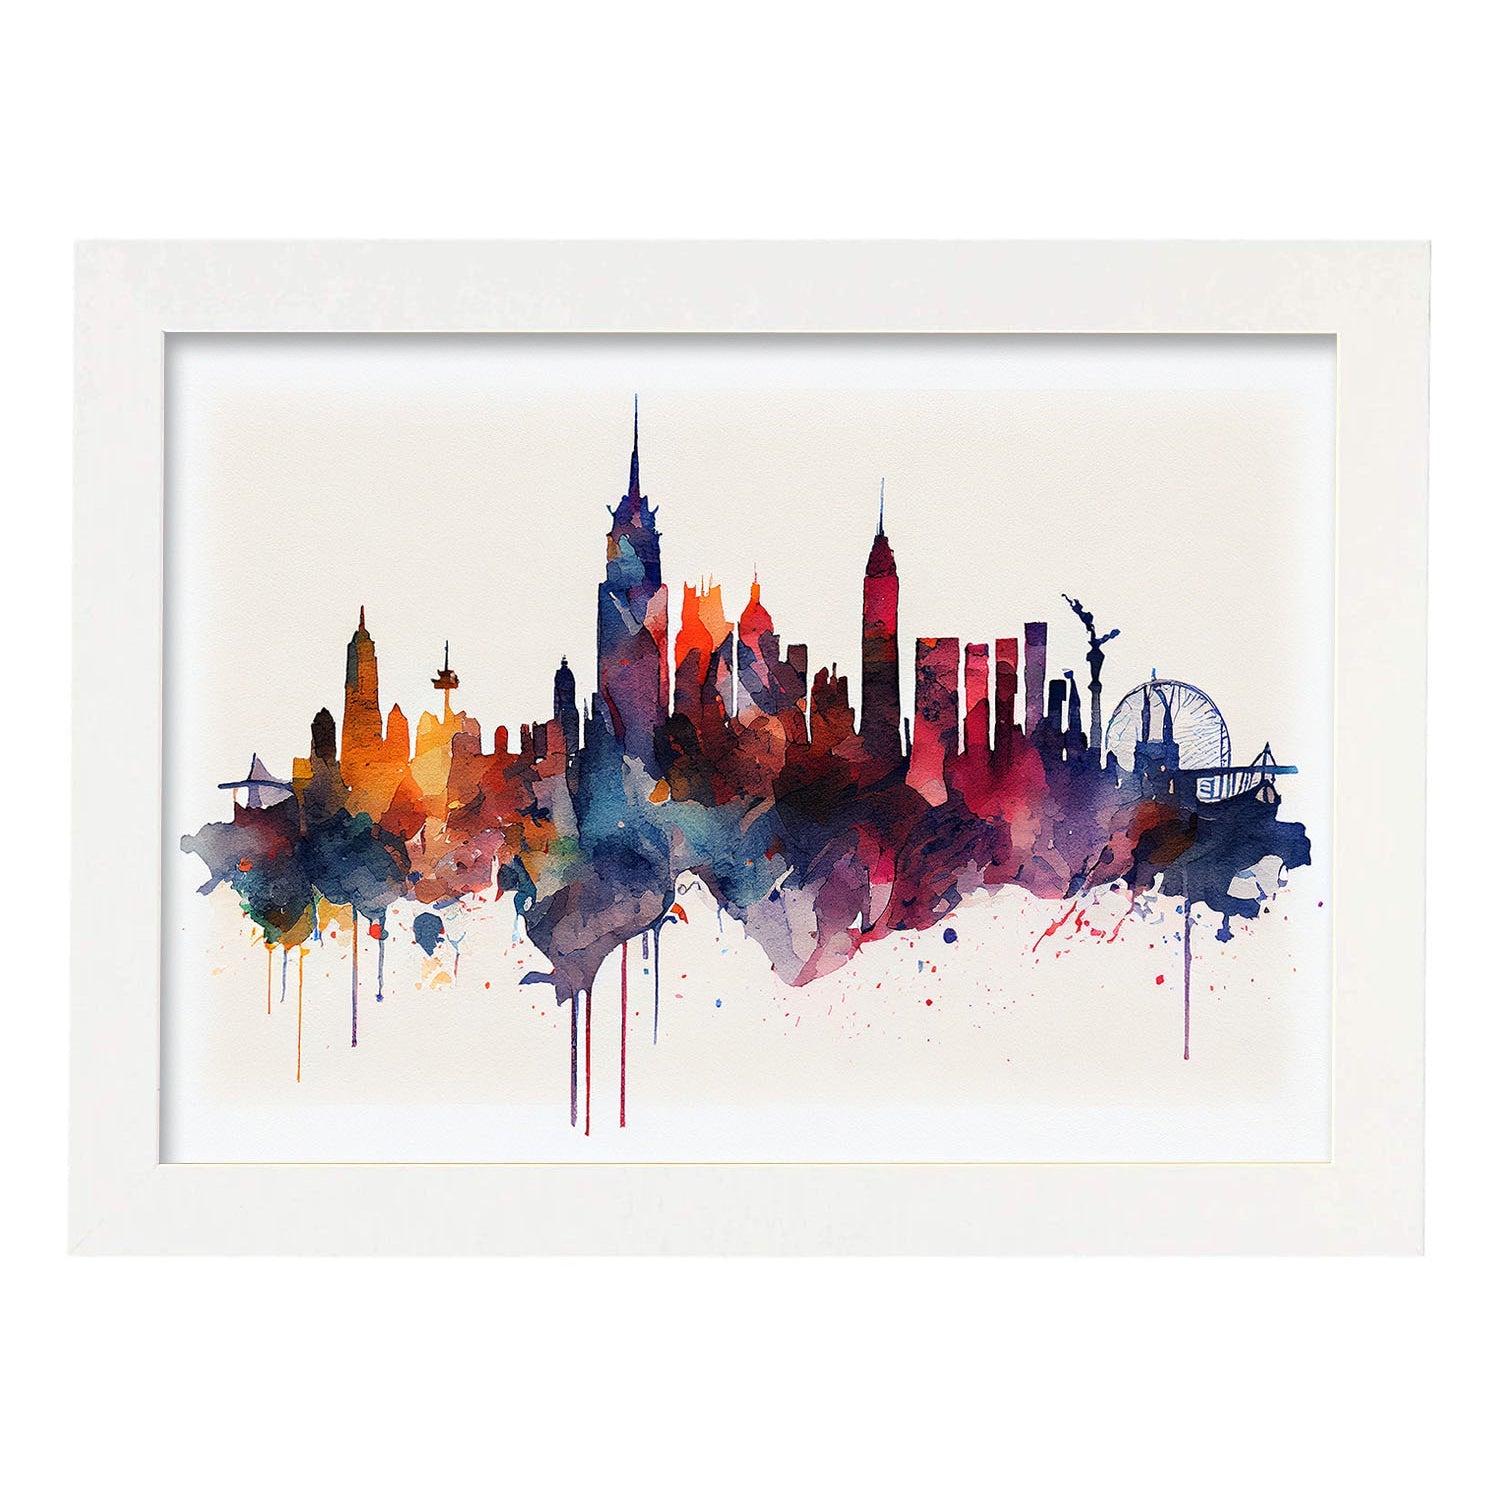 Nacnic watercolor of a skyline of the city of New York_1. Aesthetic Wall Art Prints for Bedroom or Living Room Design.-Artwork-Nacnic-A4-Marco Blanco-Nacnic Estudio SL